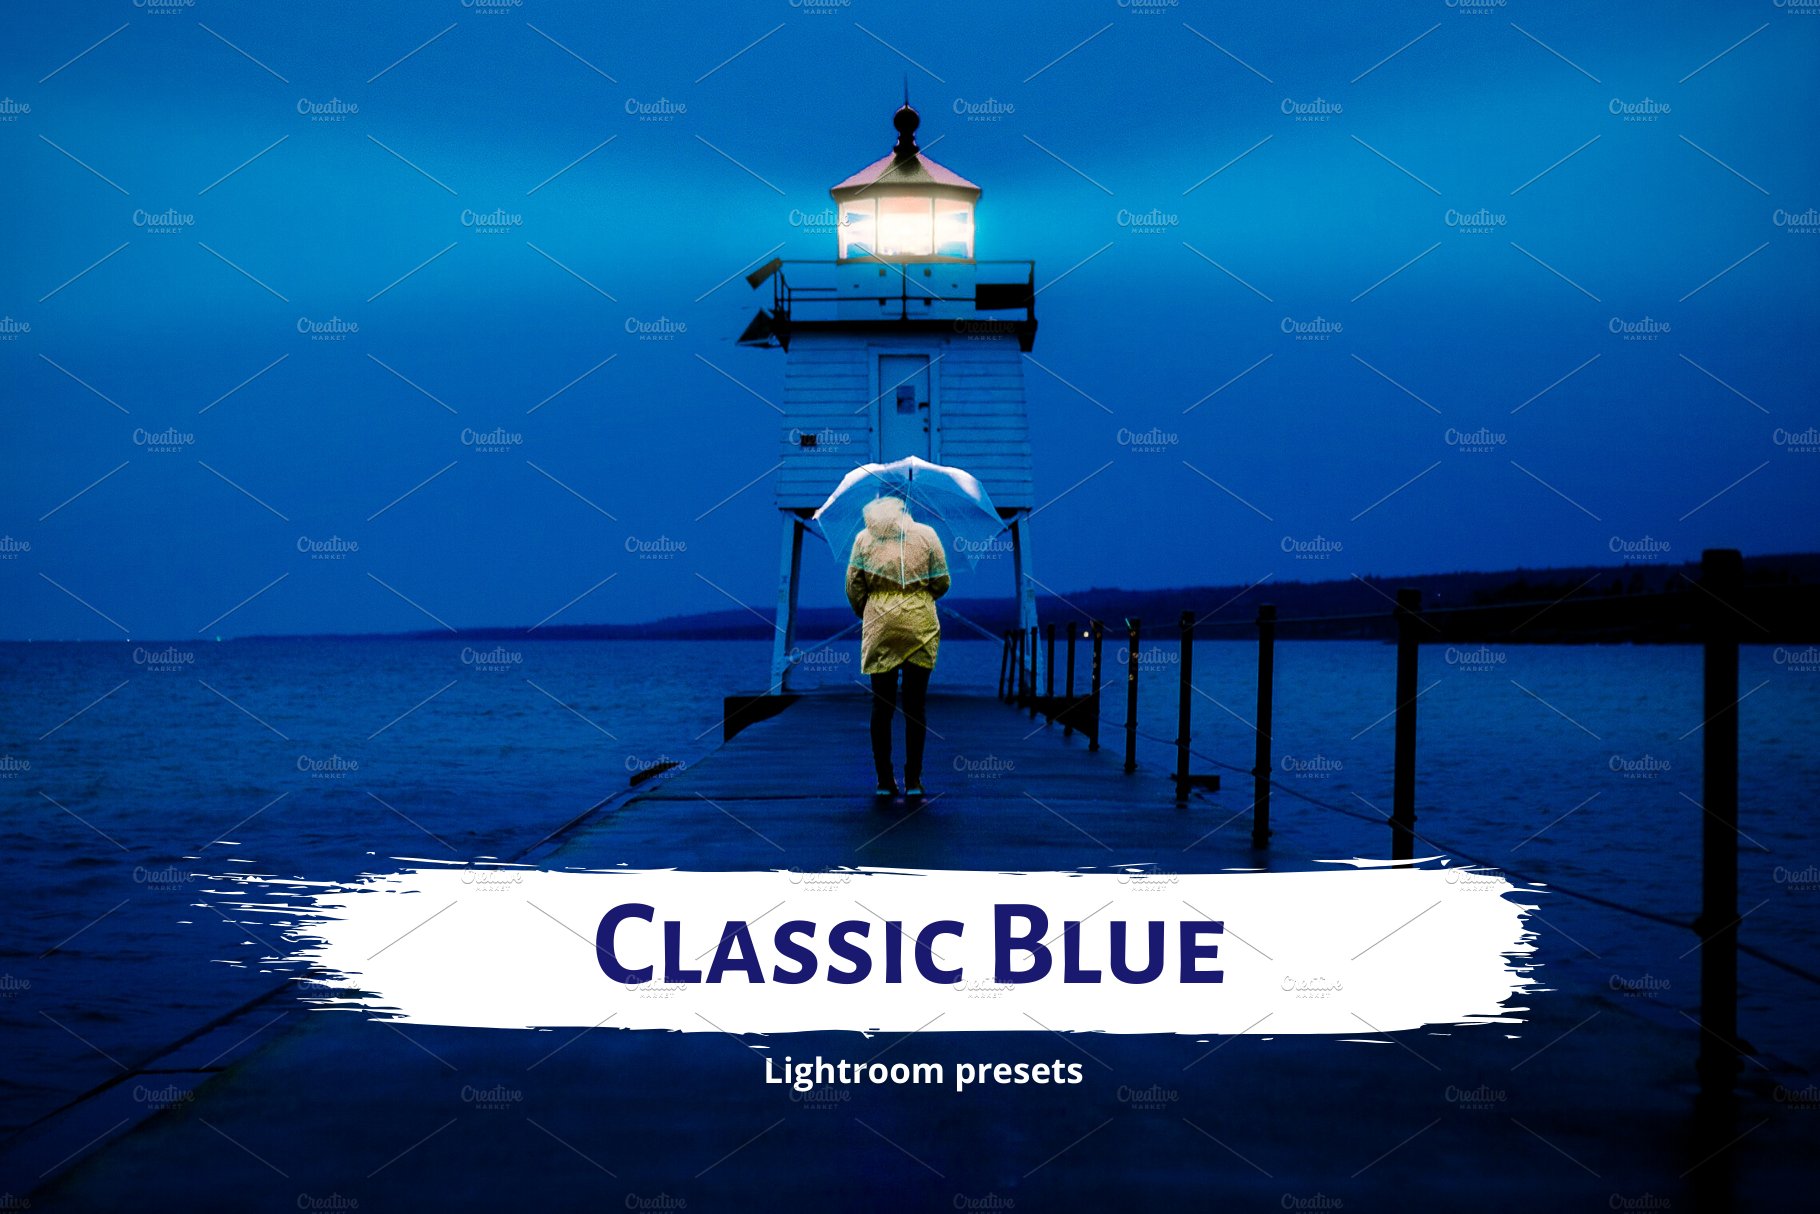 5 Classic Blue Lightroom Presetscover image.